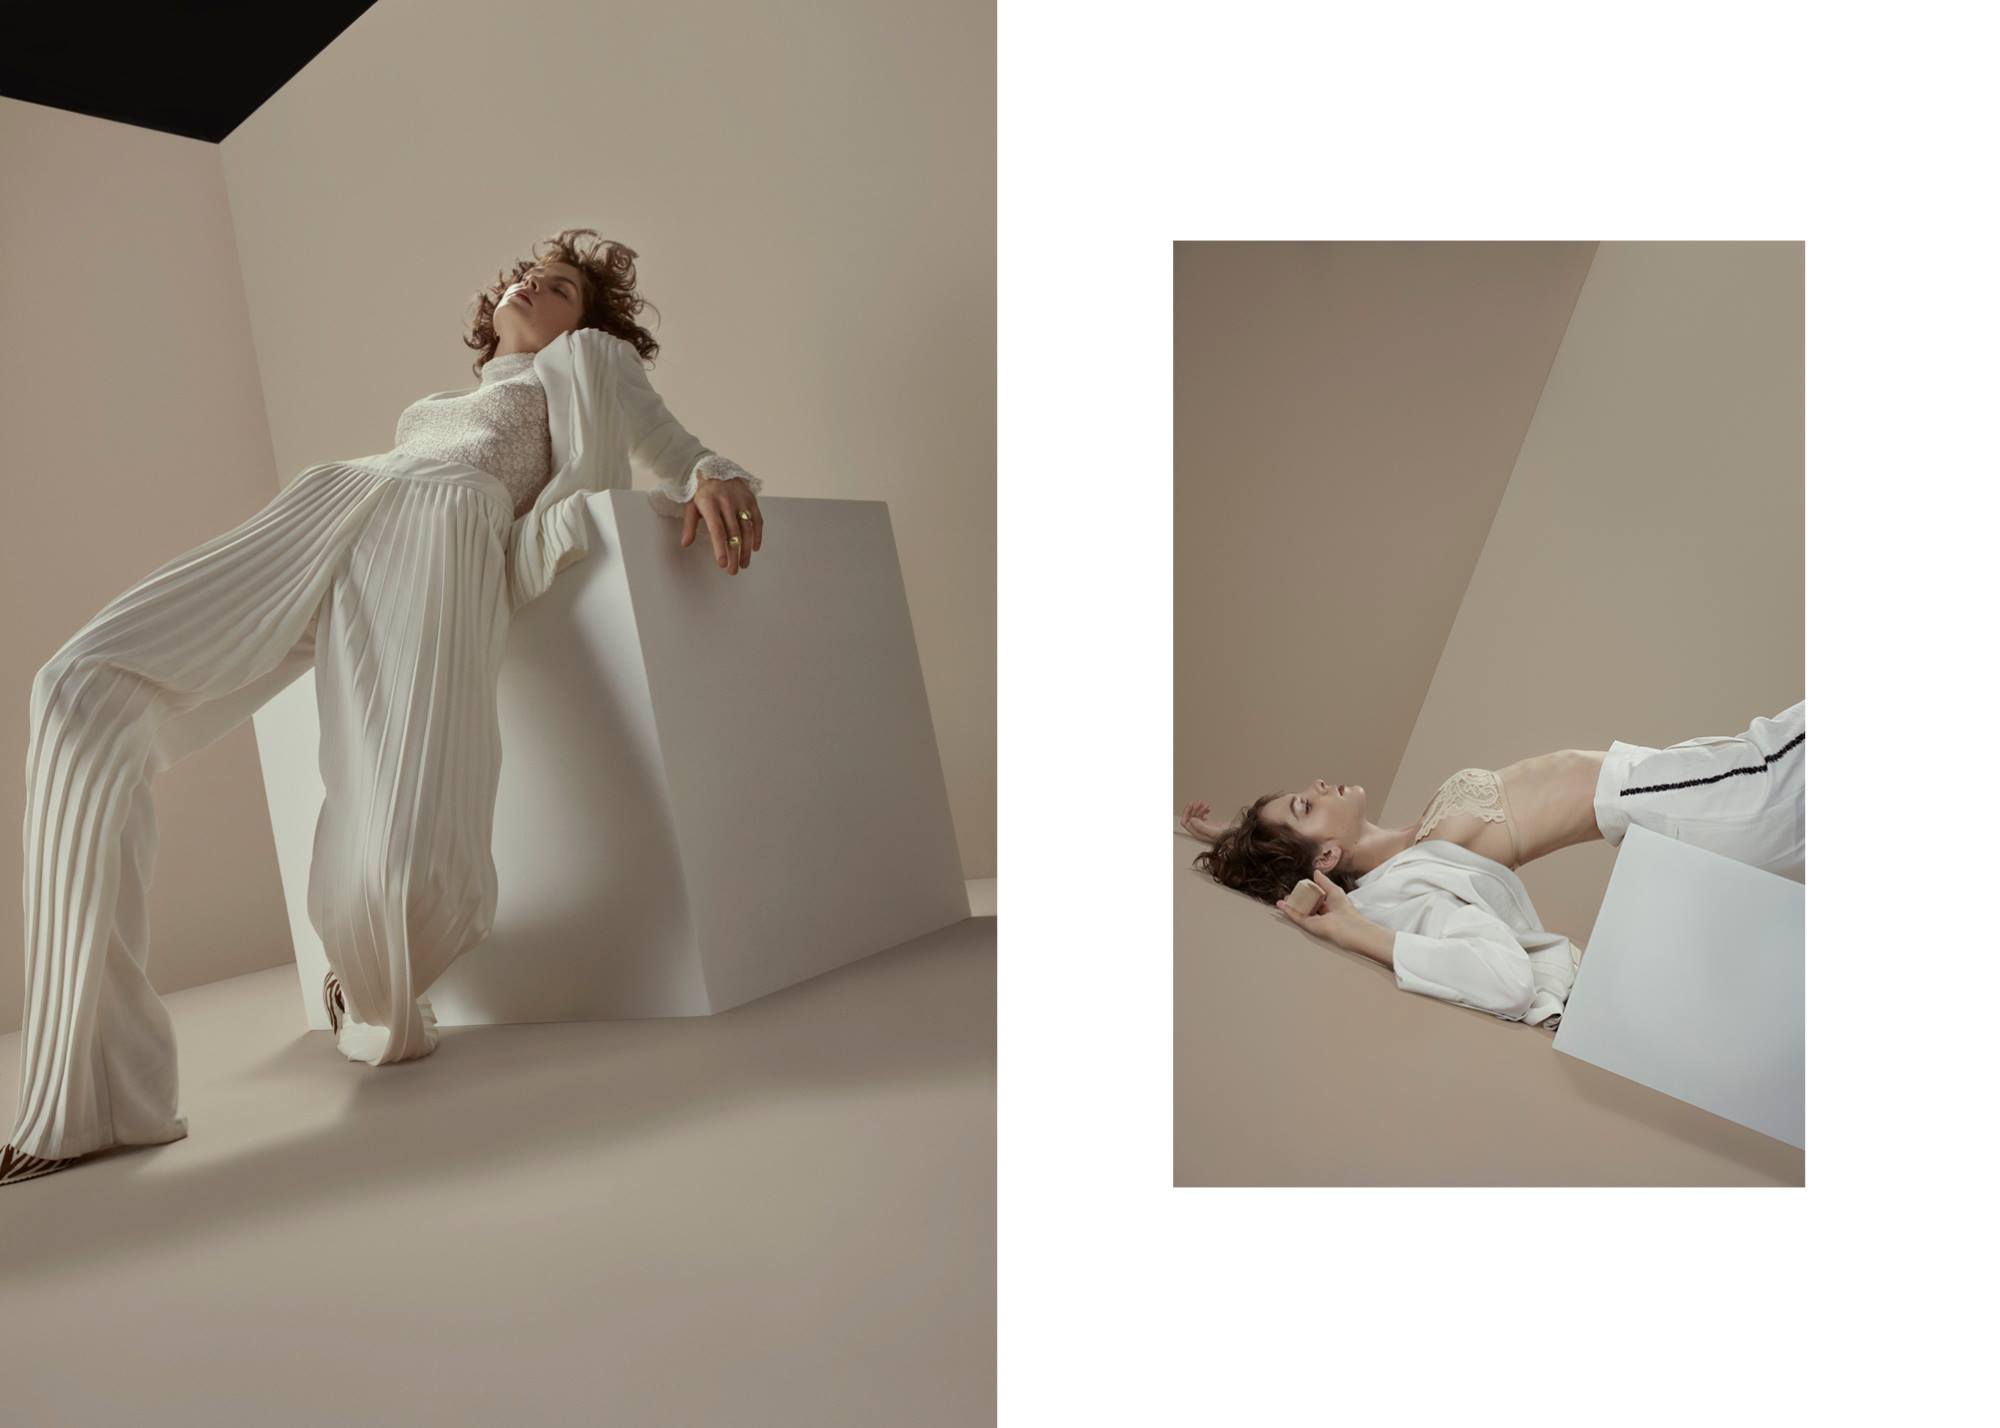 EDTORIAL: Be/ge styled by KAS KRYST for Schön! Magazine